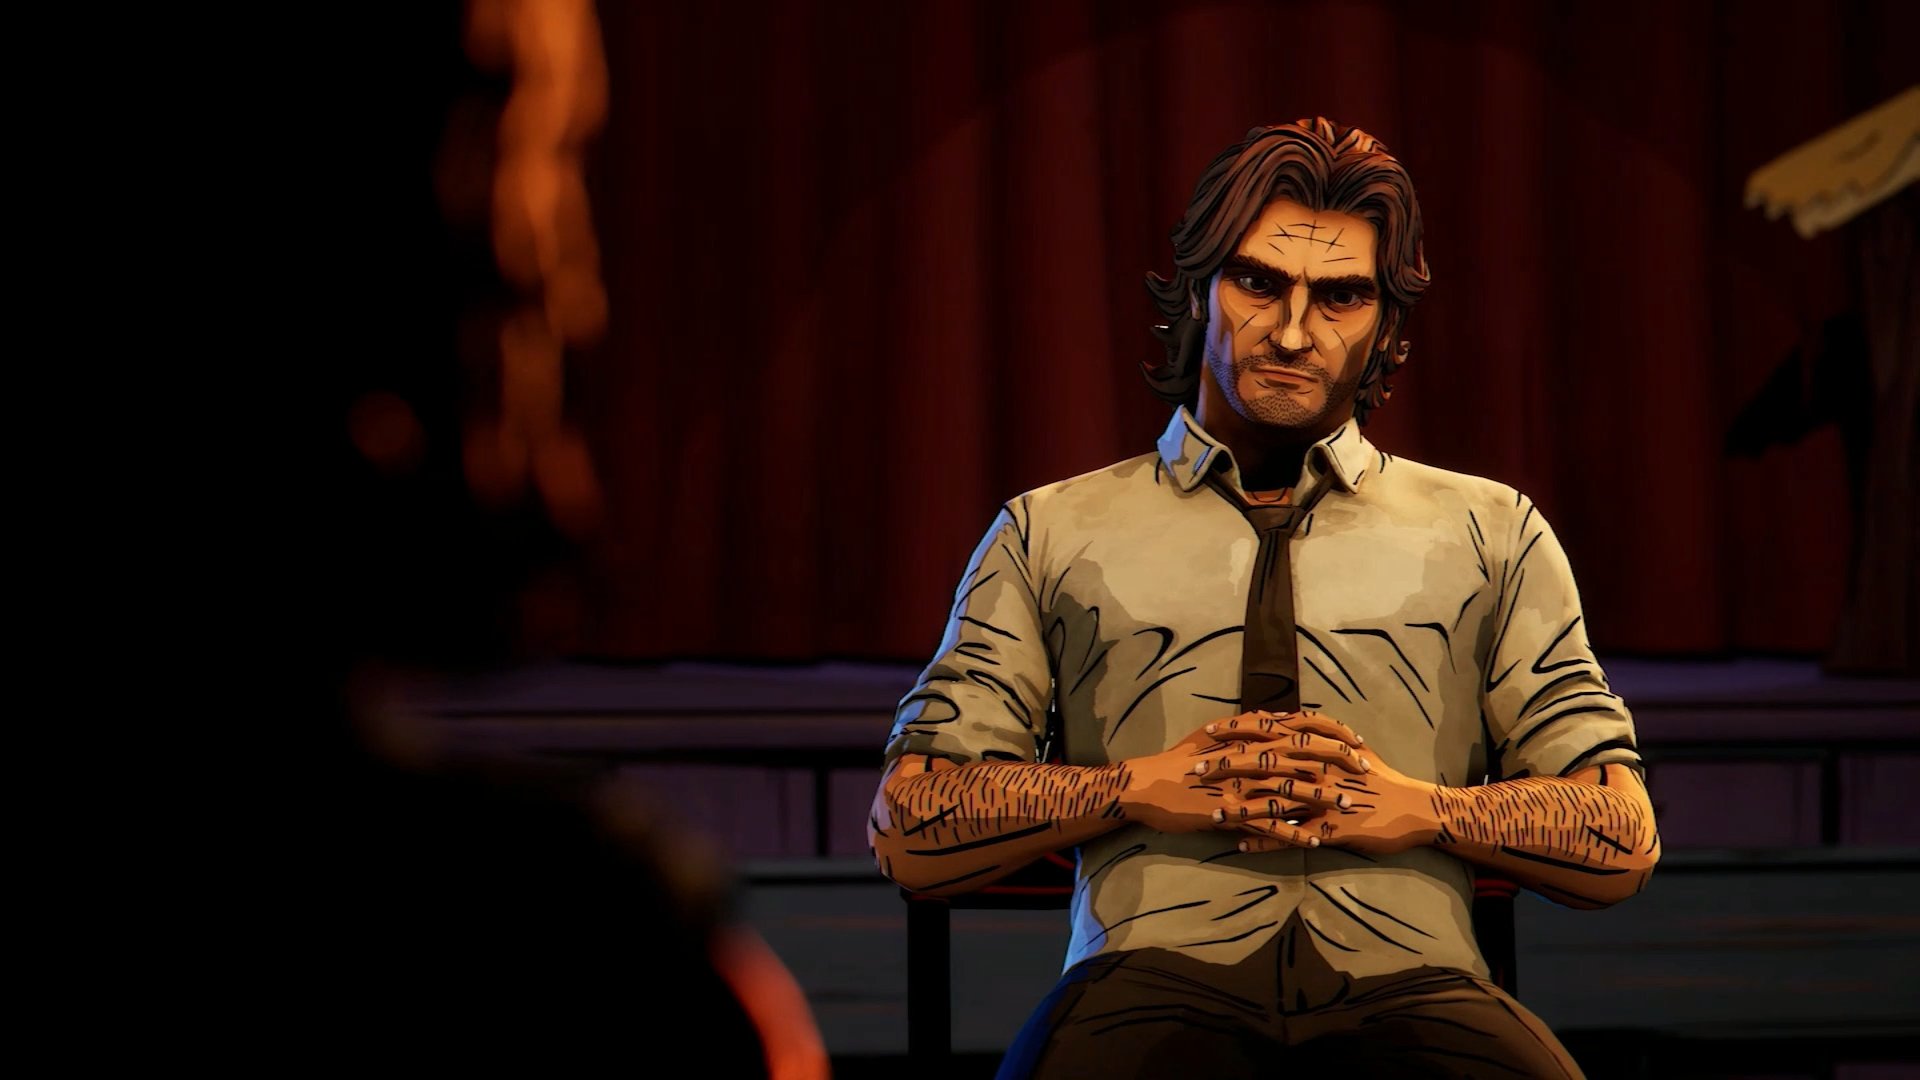 The Wolf Among Us 2 launches in 2023